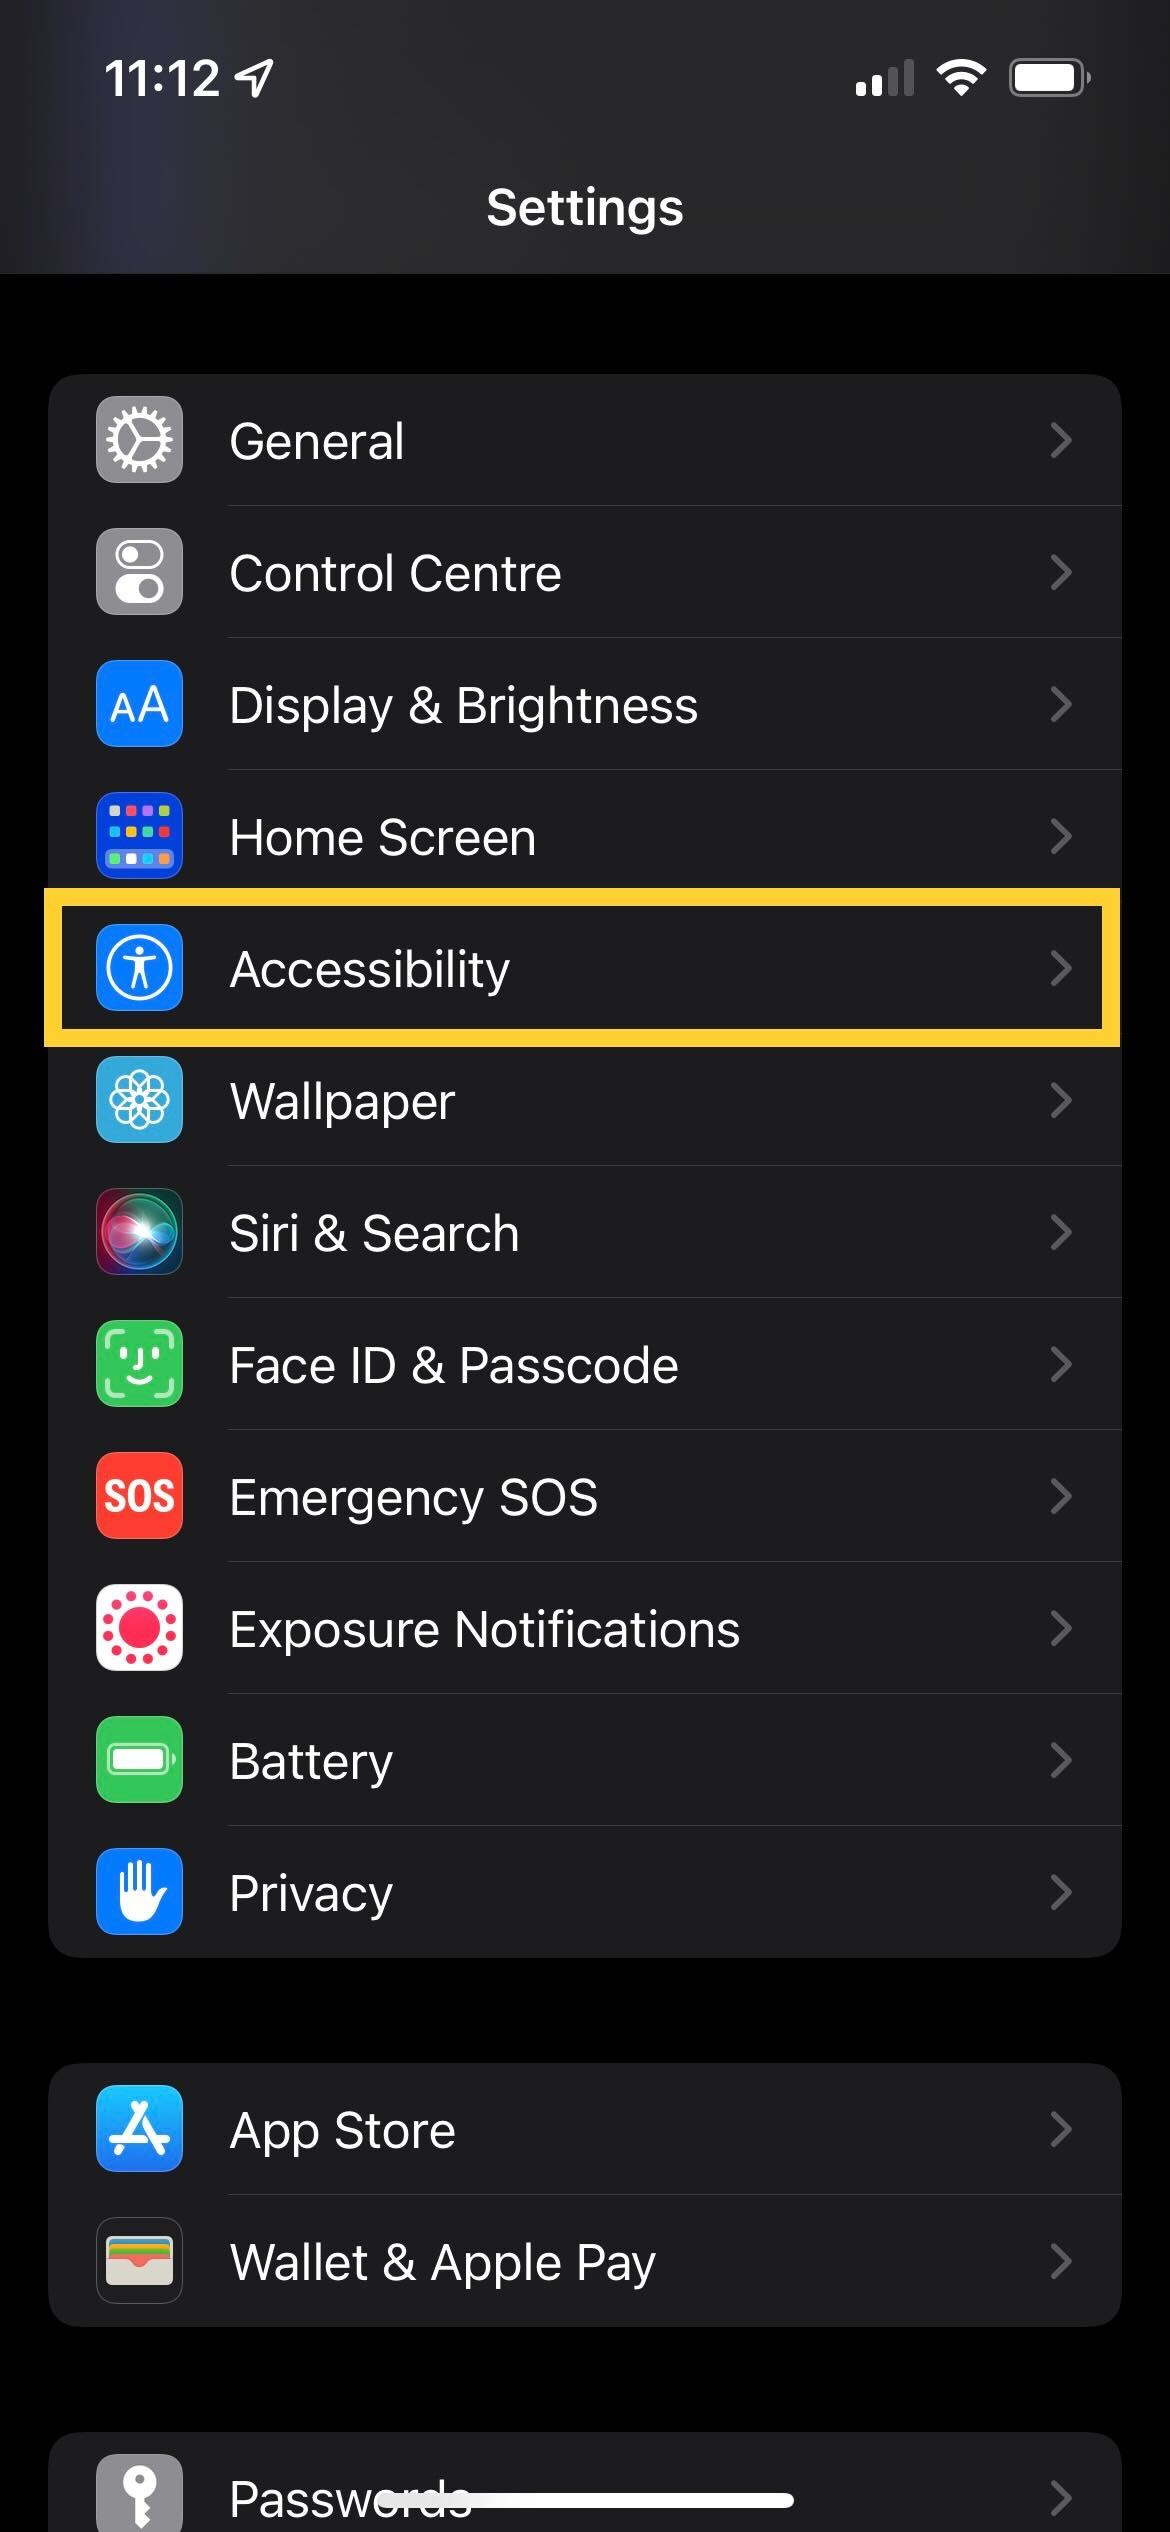 The accessibility button in iOS settings